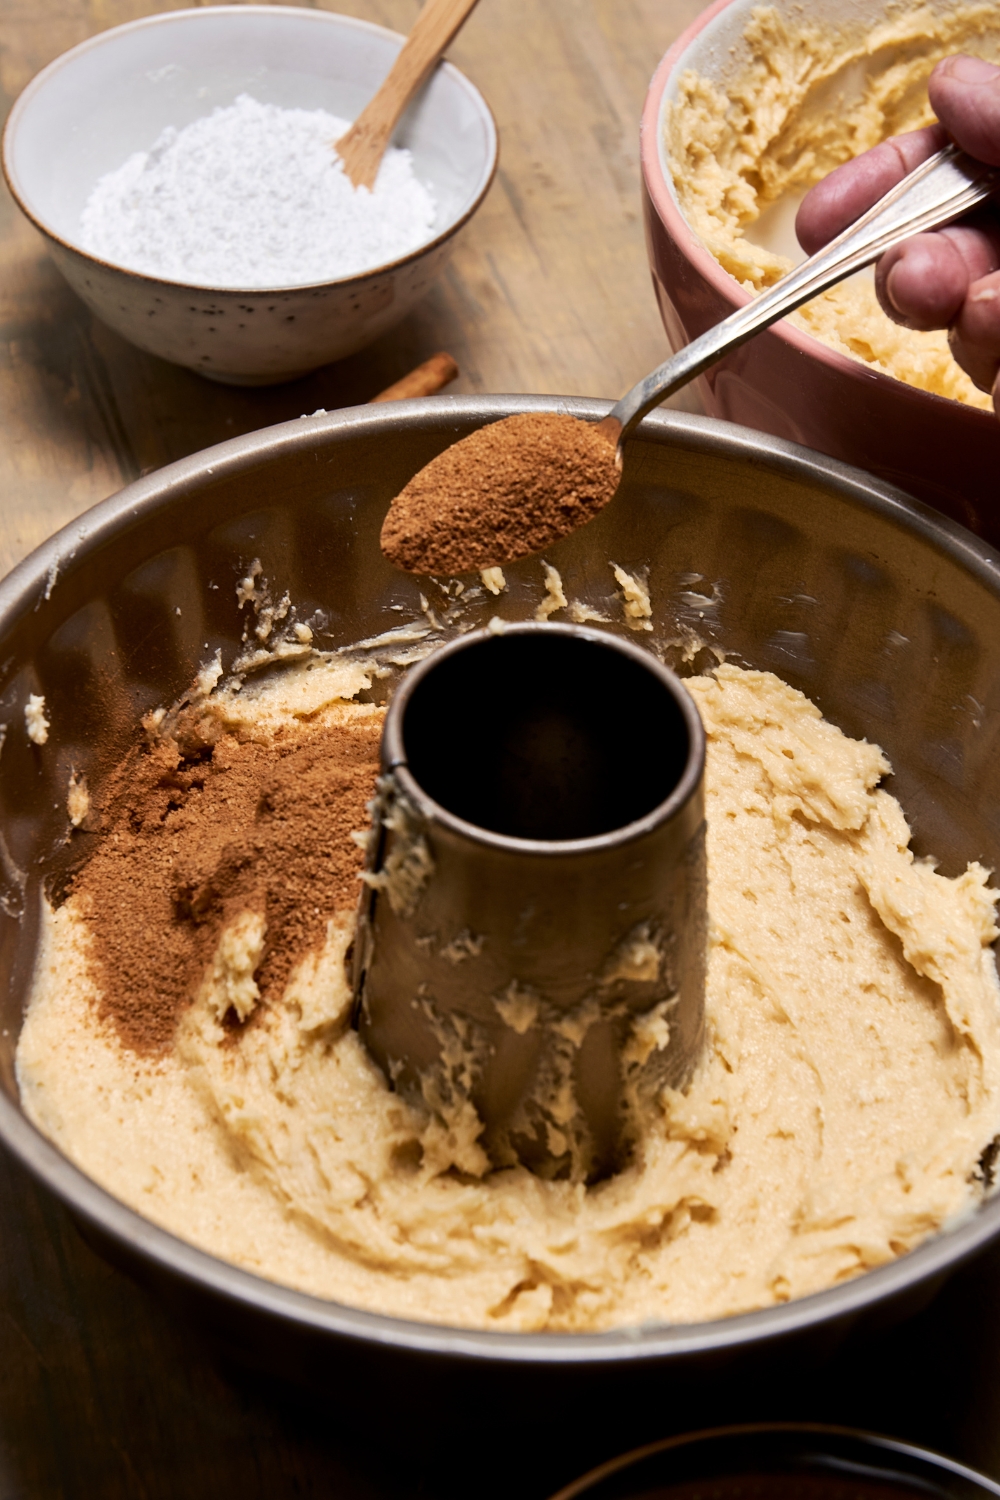 A bundt pan with half the cake batter being topped with cinnamon and sugar.